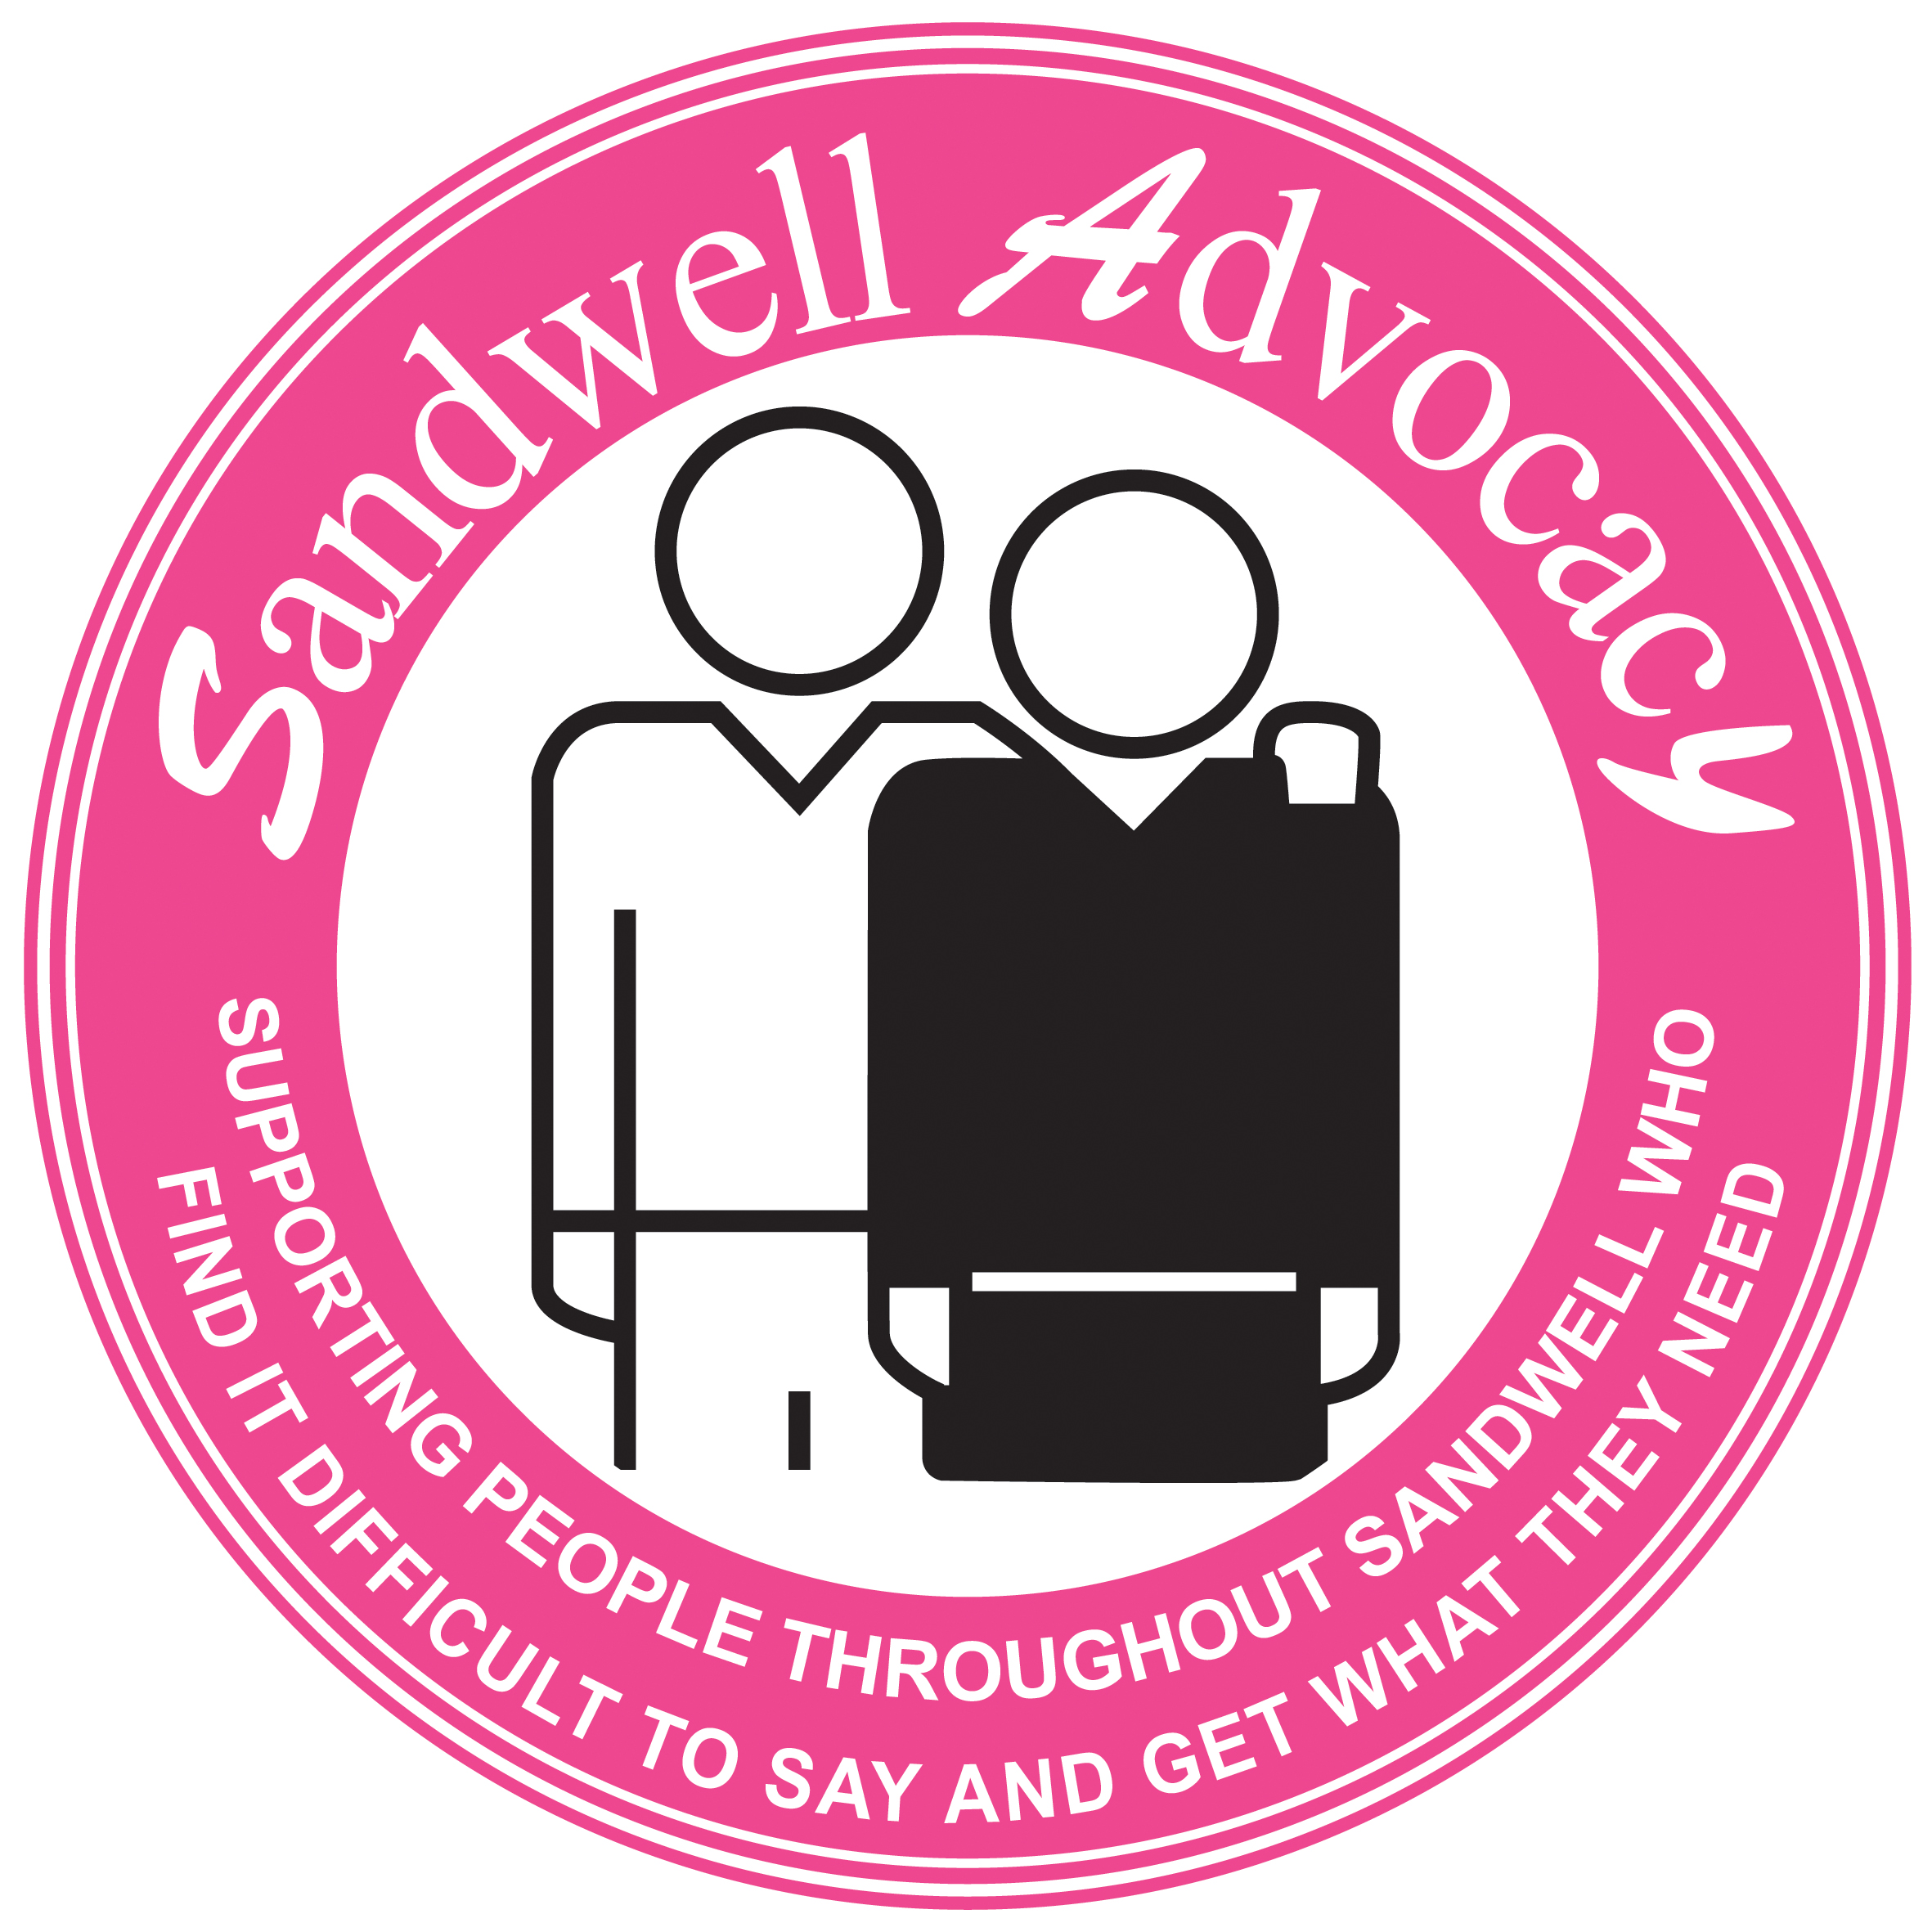 S&well Advocacy